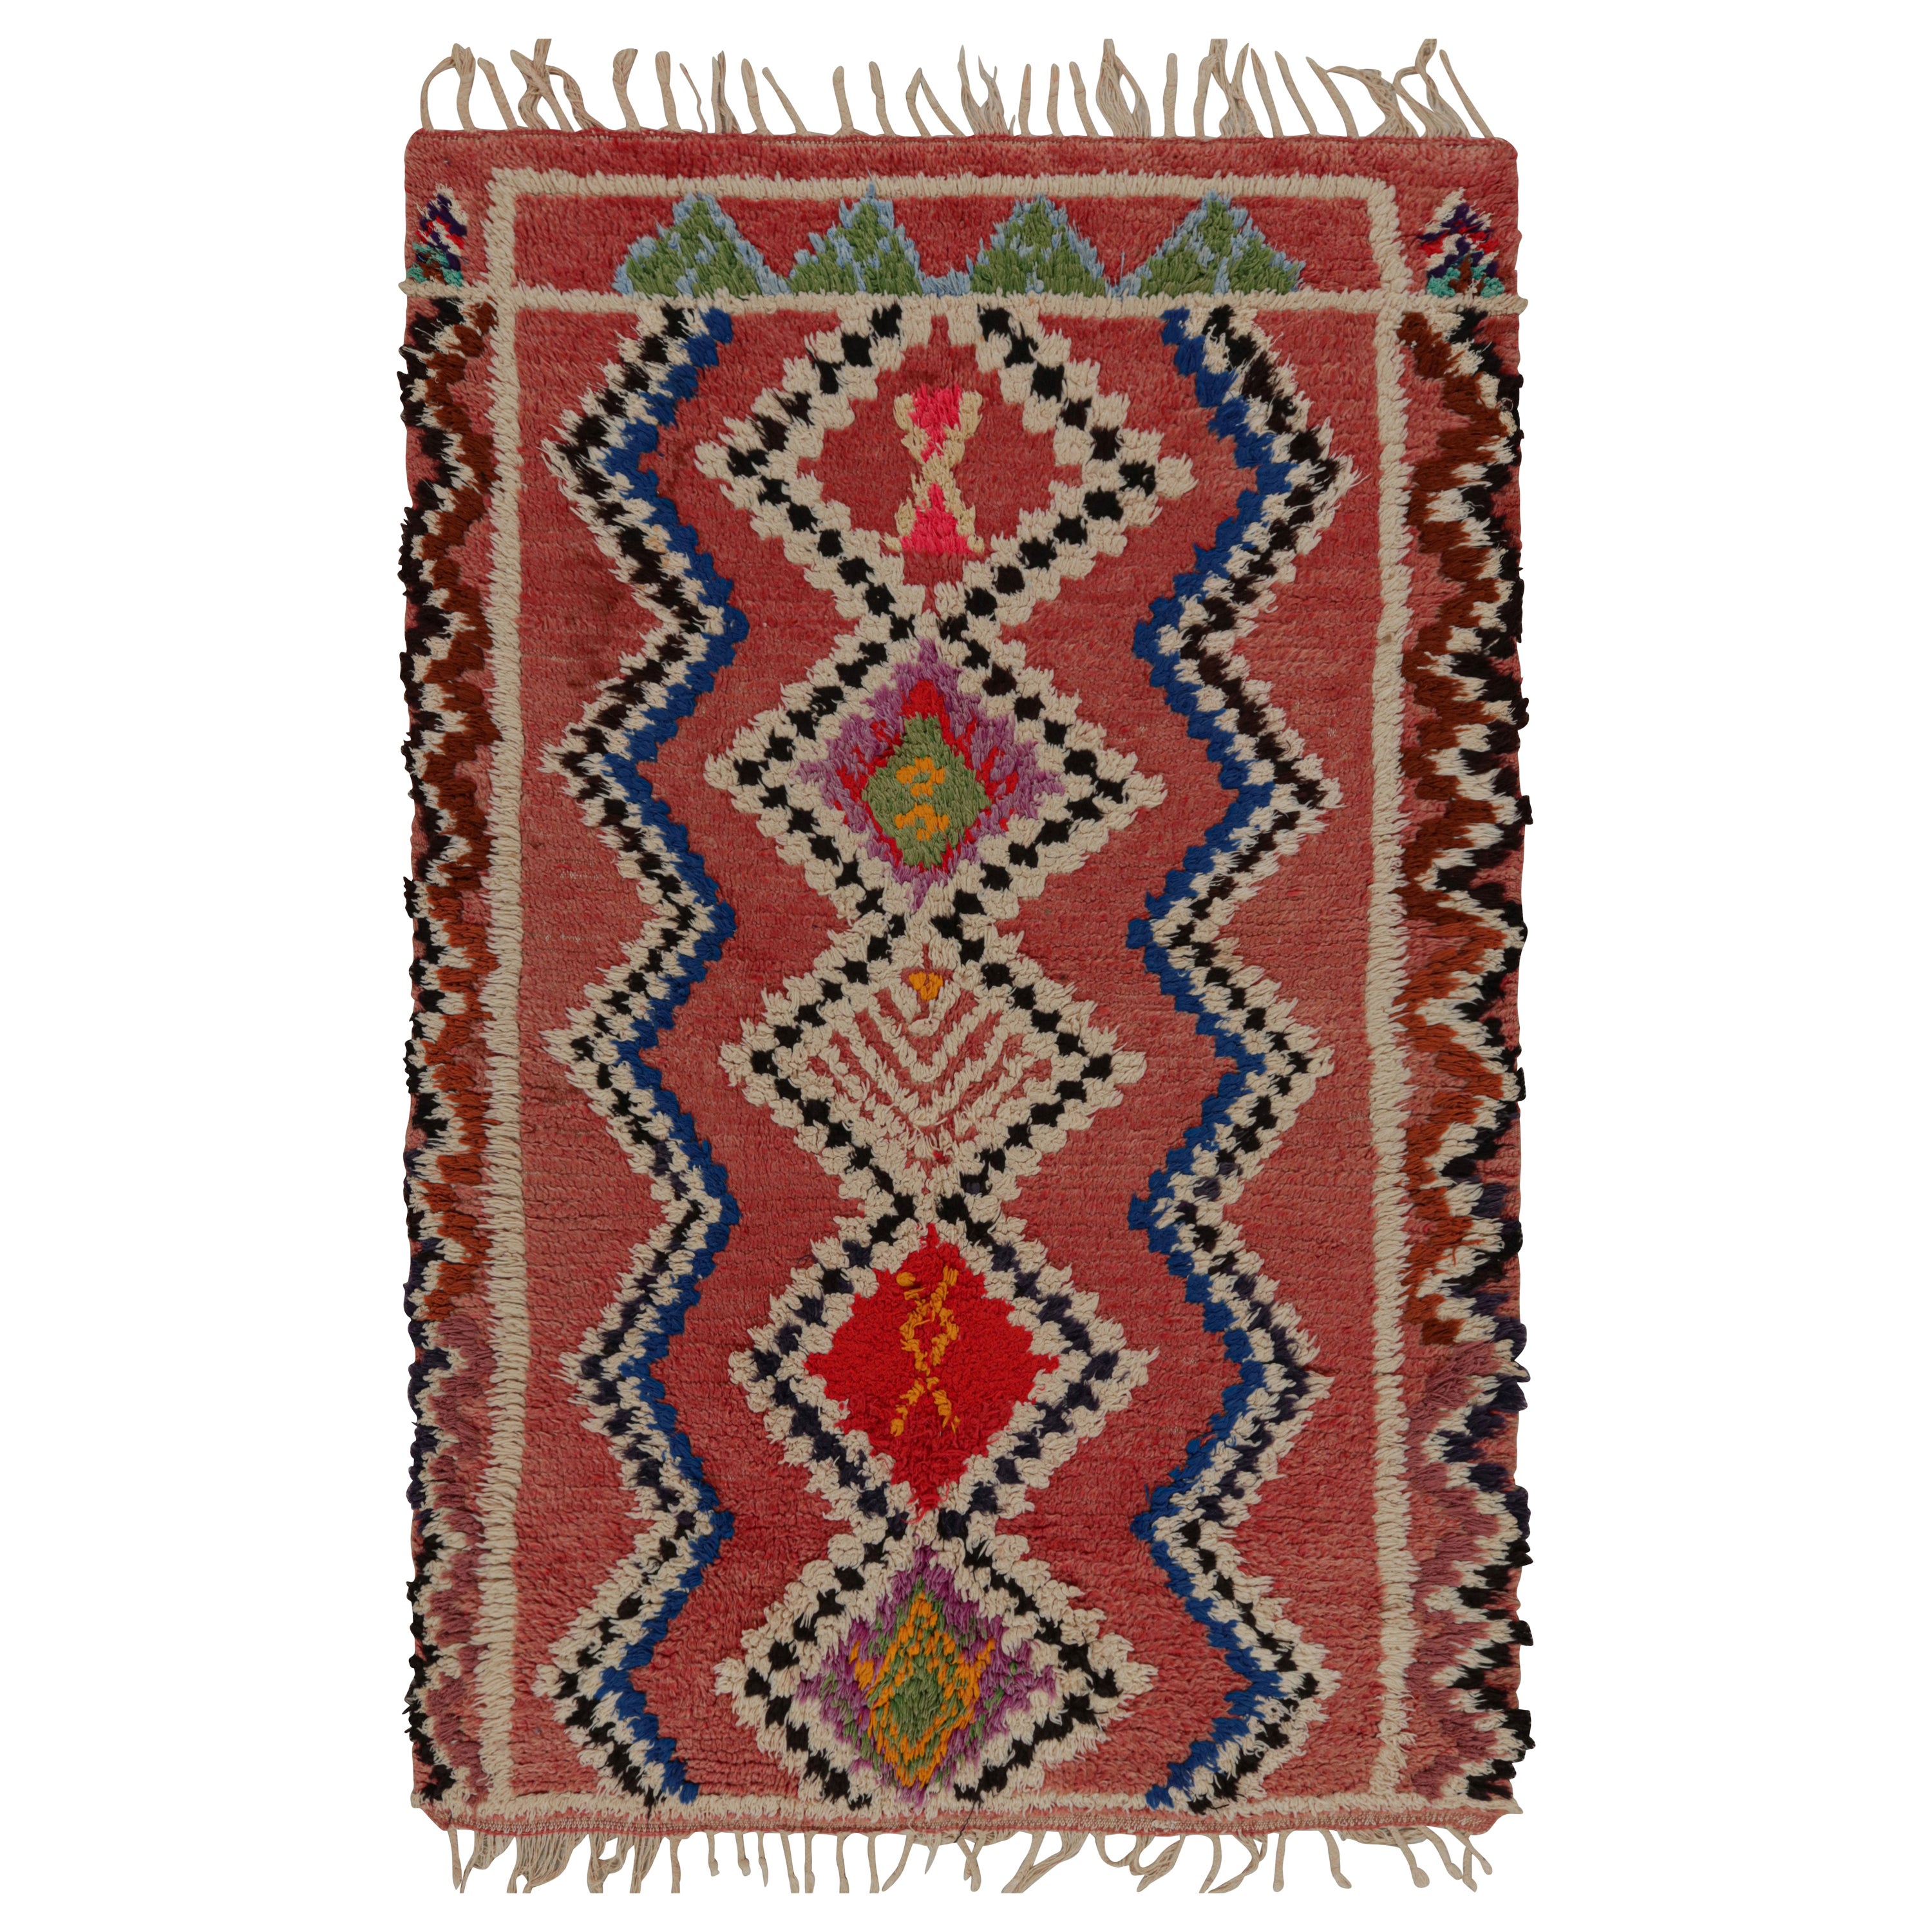 Vintage Moroccan Rug in Salmon Red with Geometric Patterns, from Rug & Kilim 